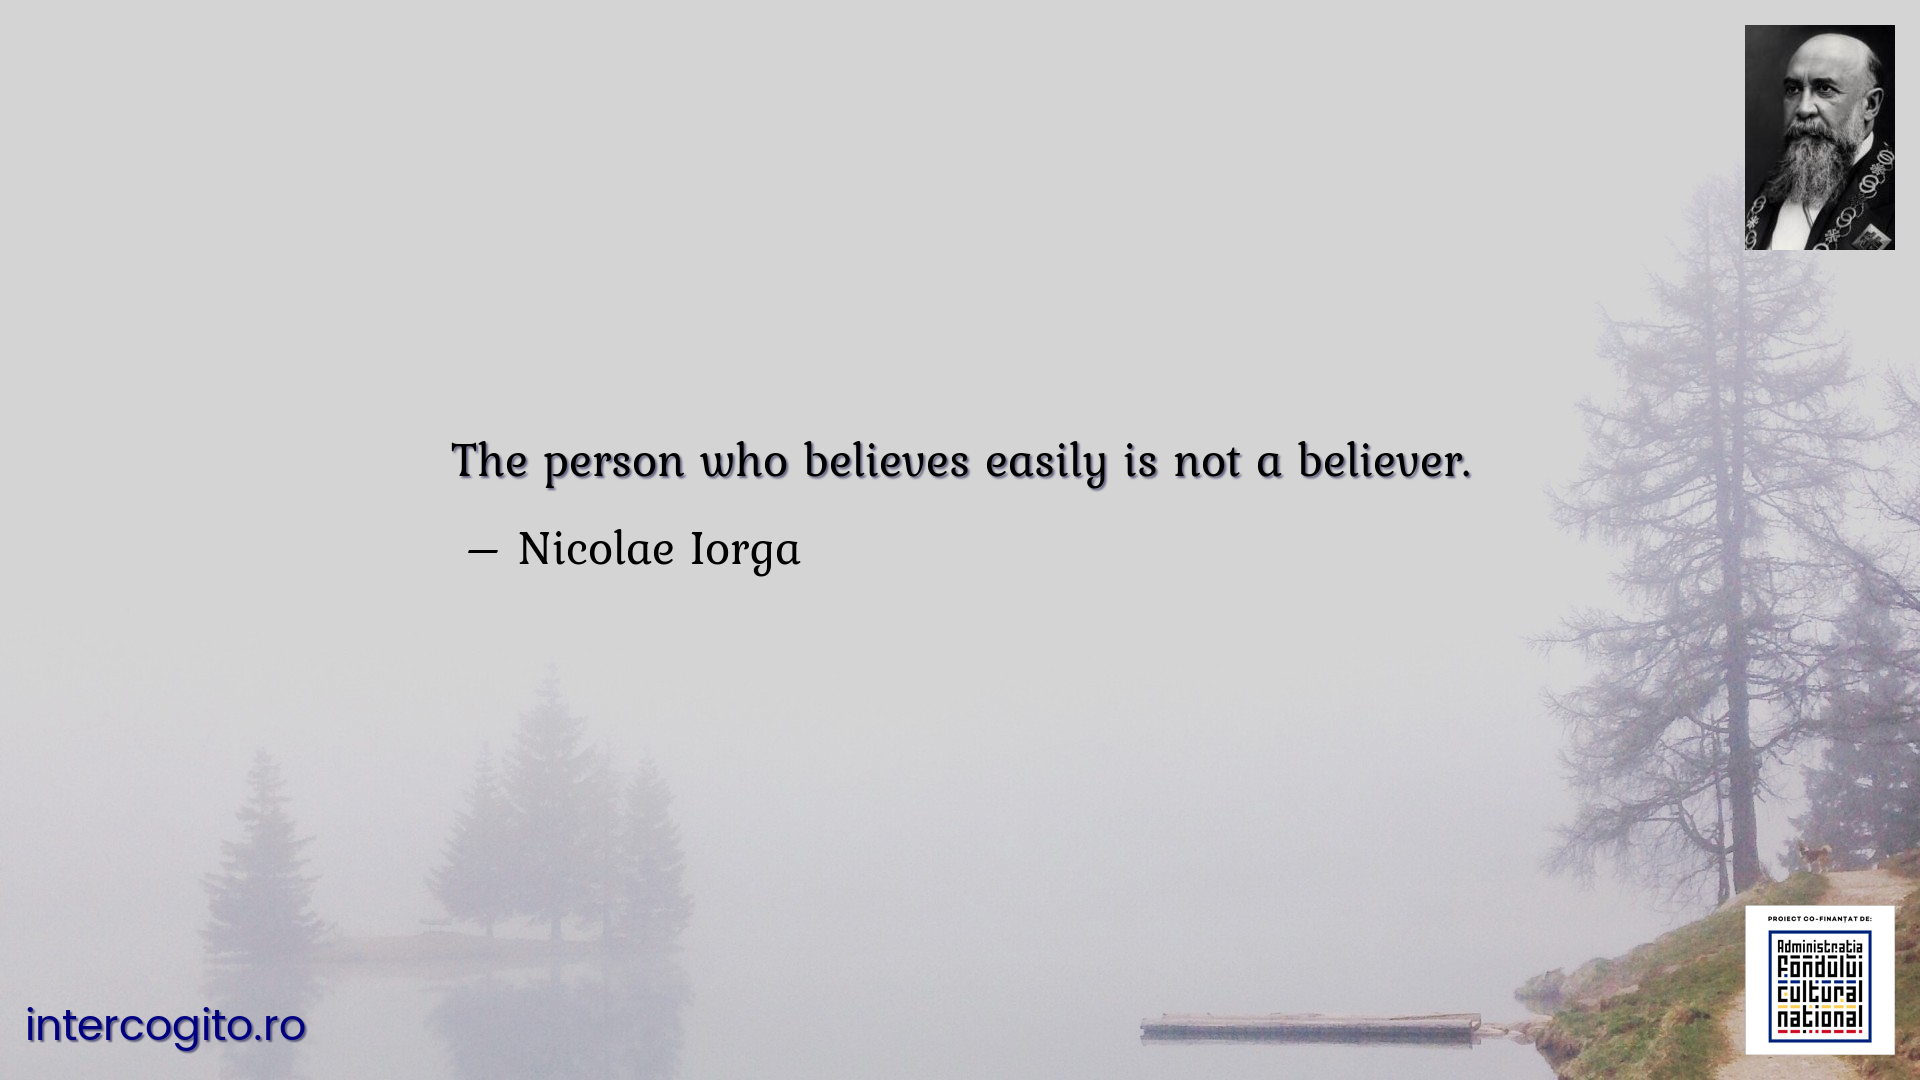 The person who believes easily is not a believer.